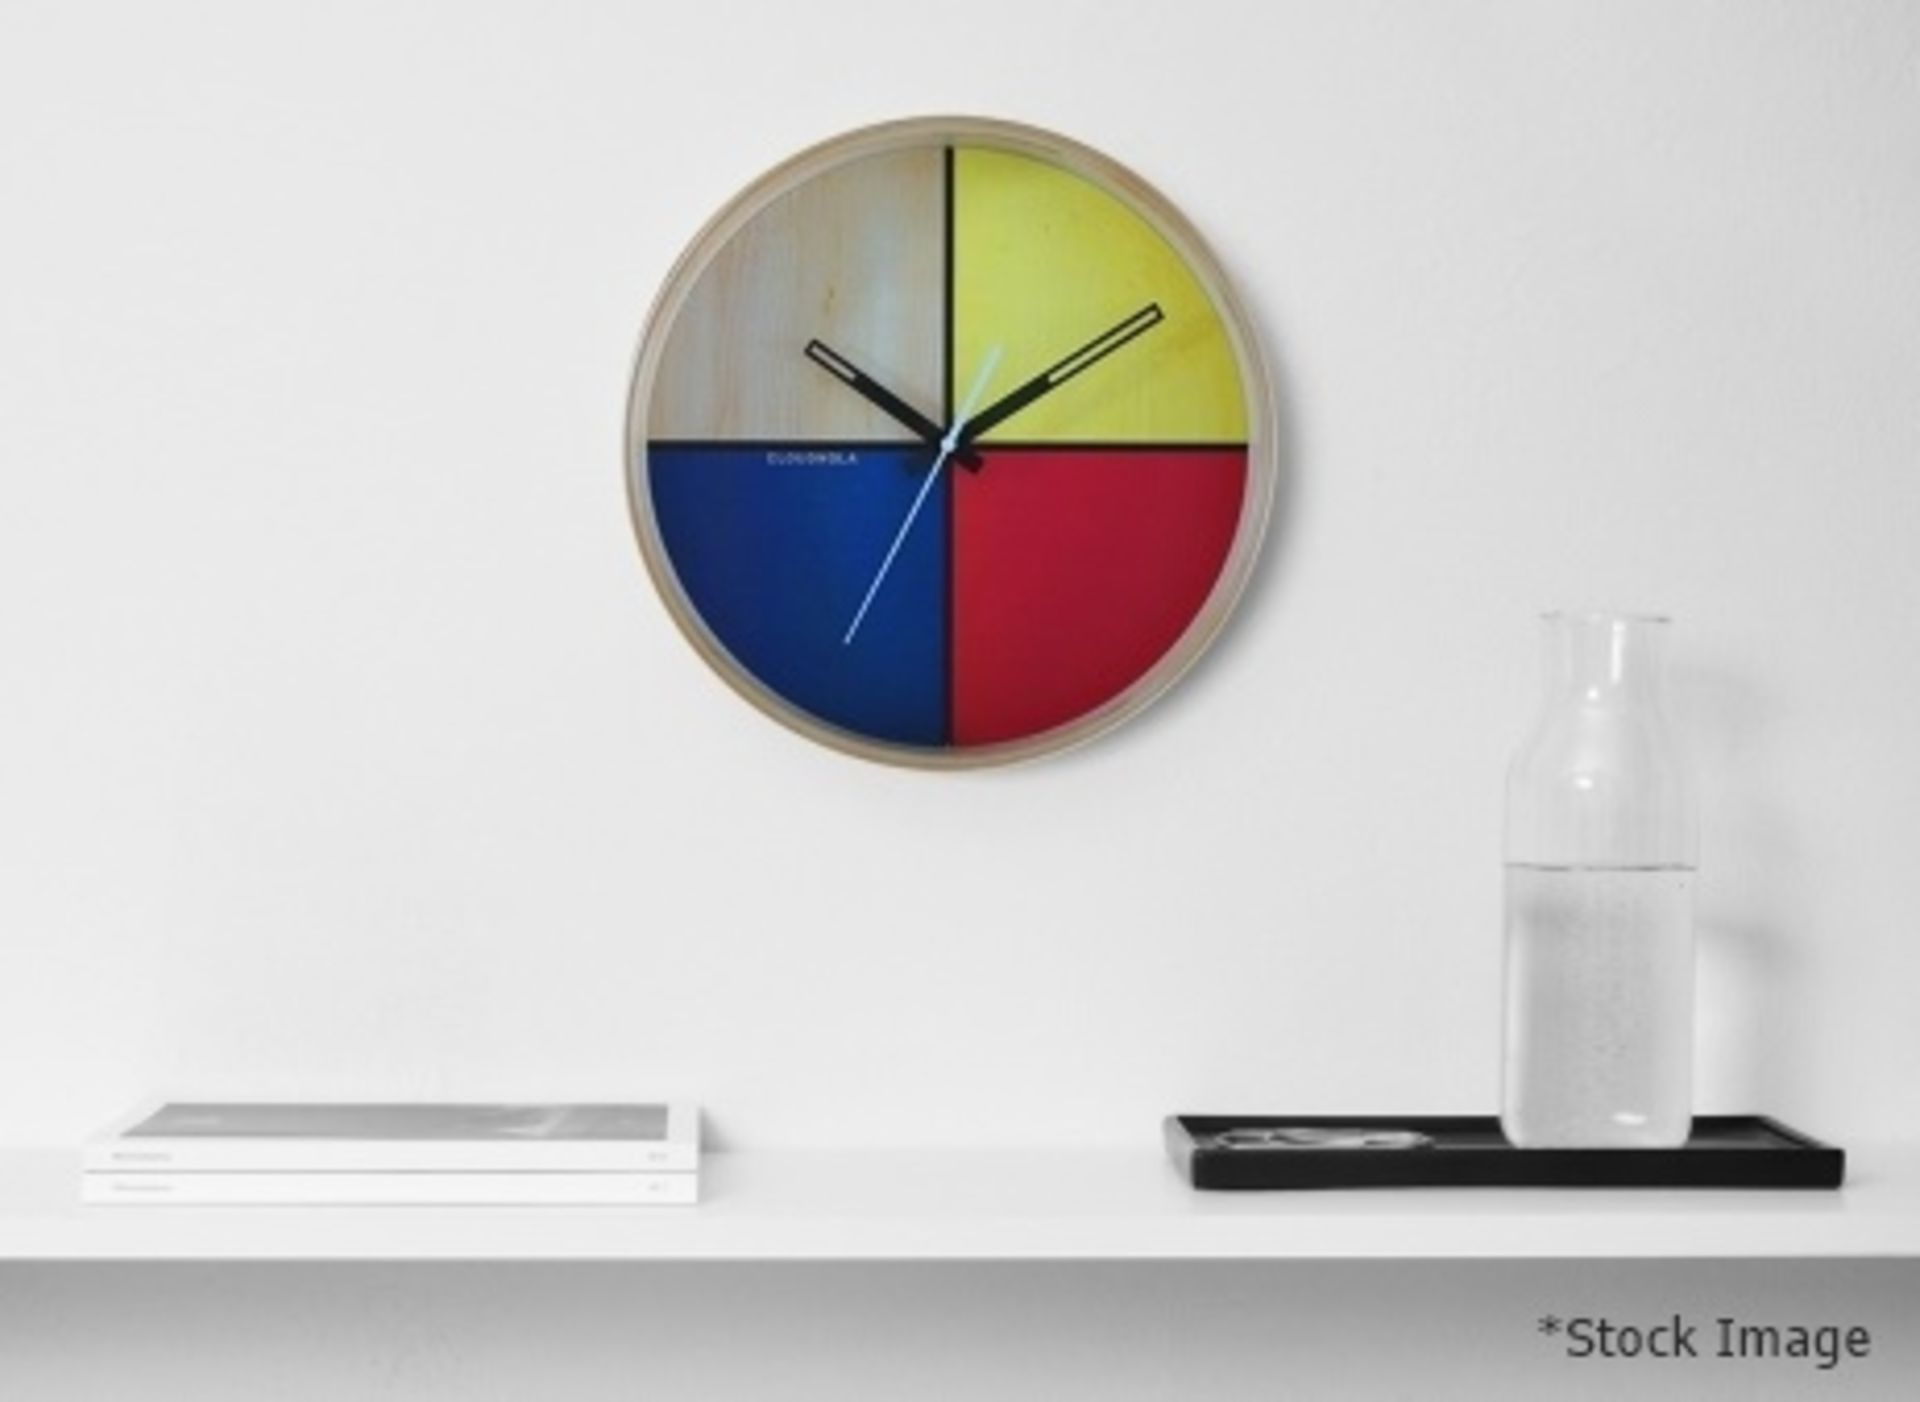 1 x CLOUDNOLA Contemporary Flur Yellow, Red, Blue & Birch Wall Clock With Offset Wooden Rim 30cm - Image 5 of 8